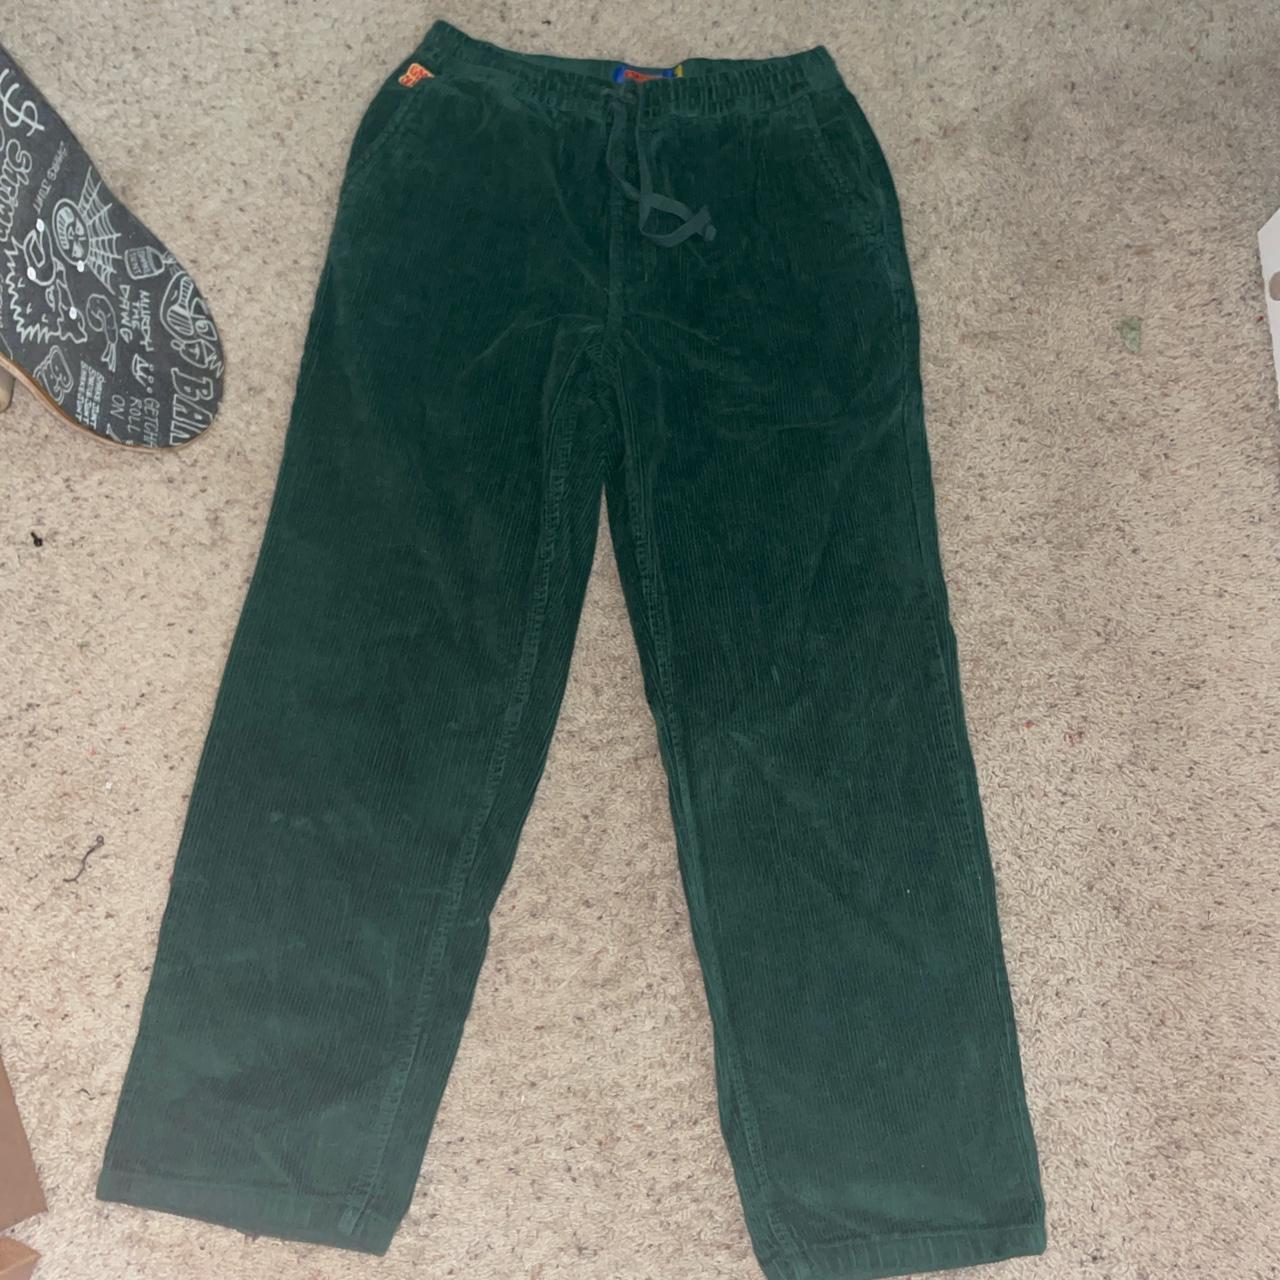 Green corduroy empyre pants with drawstring, size... - Depop